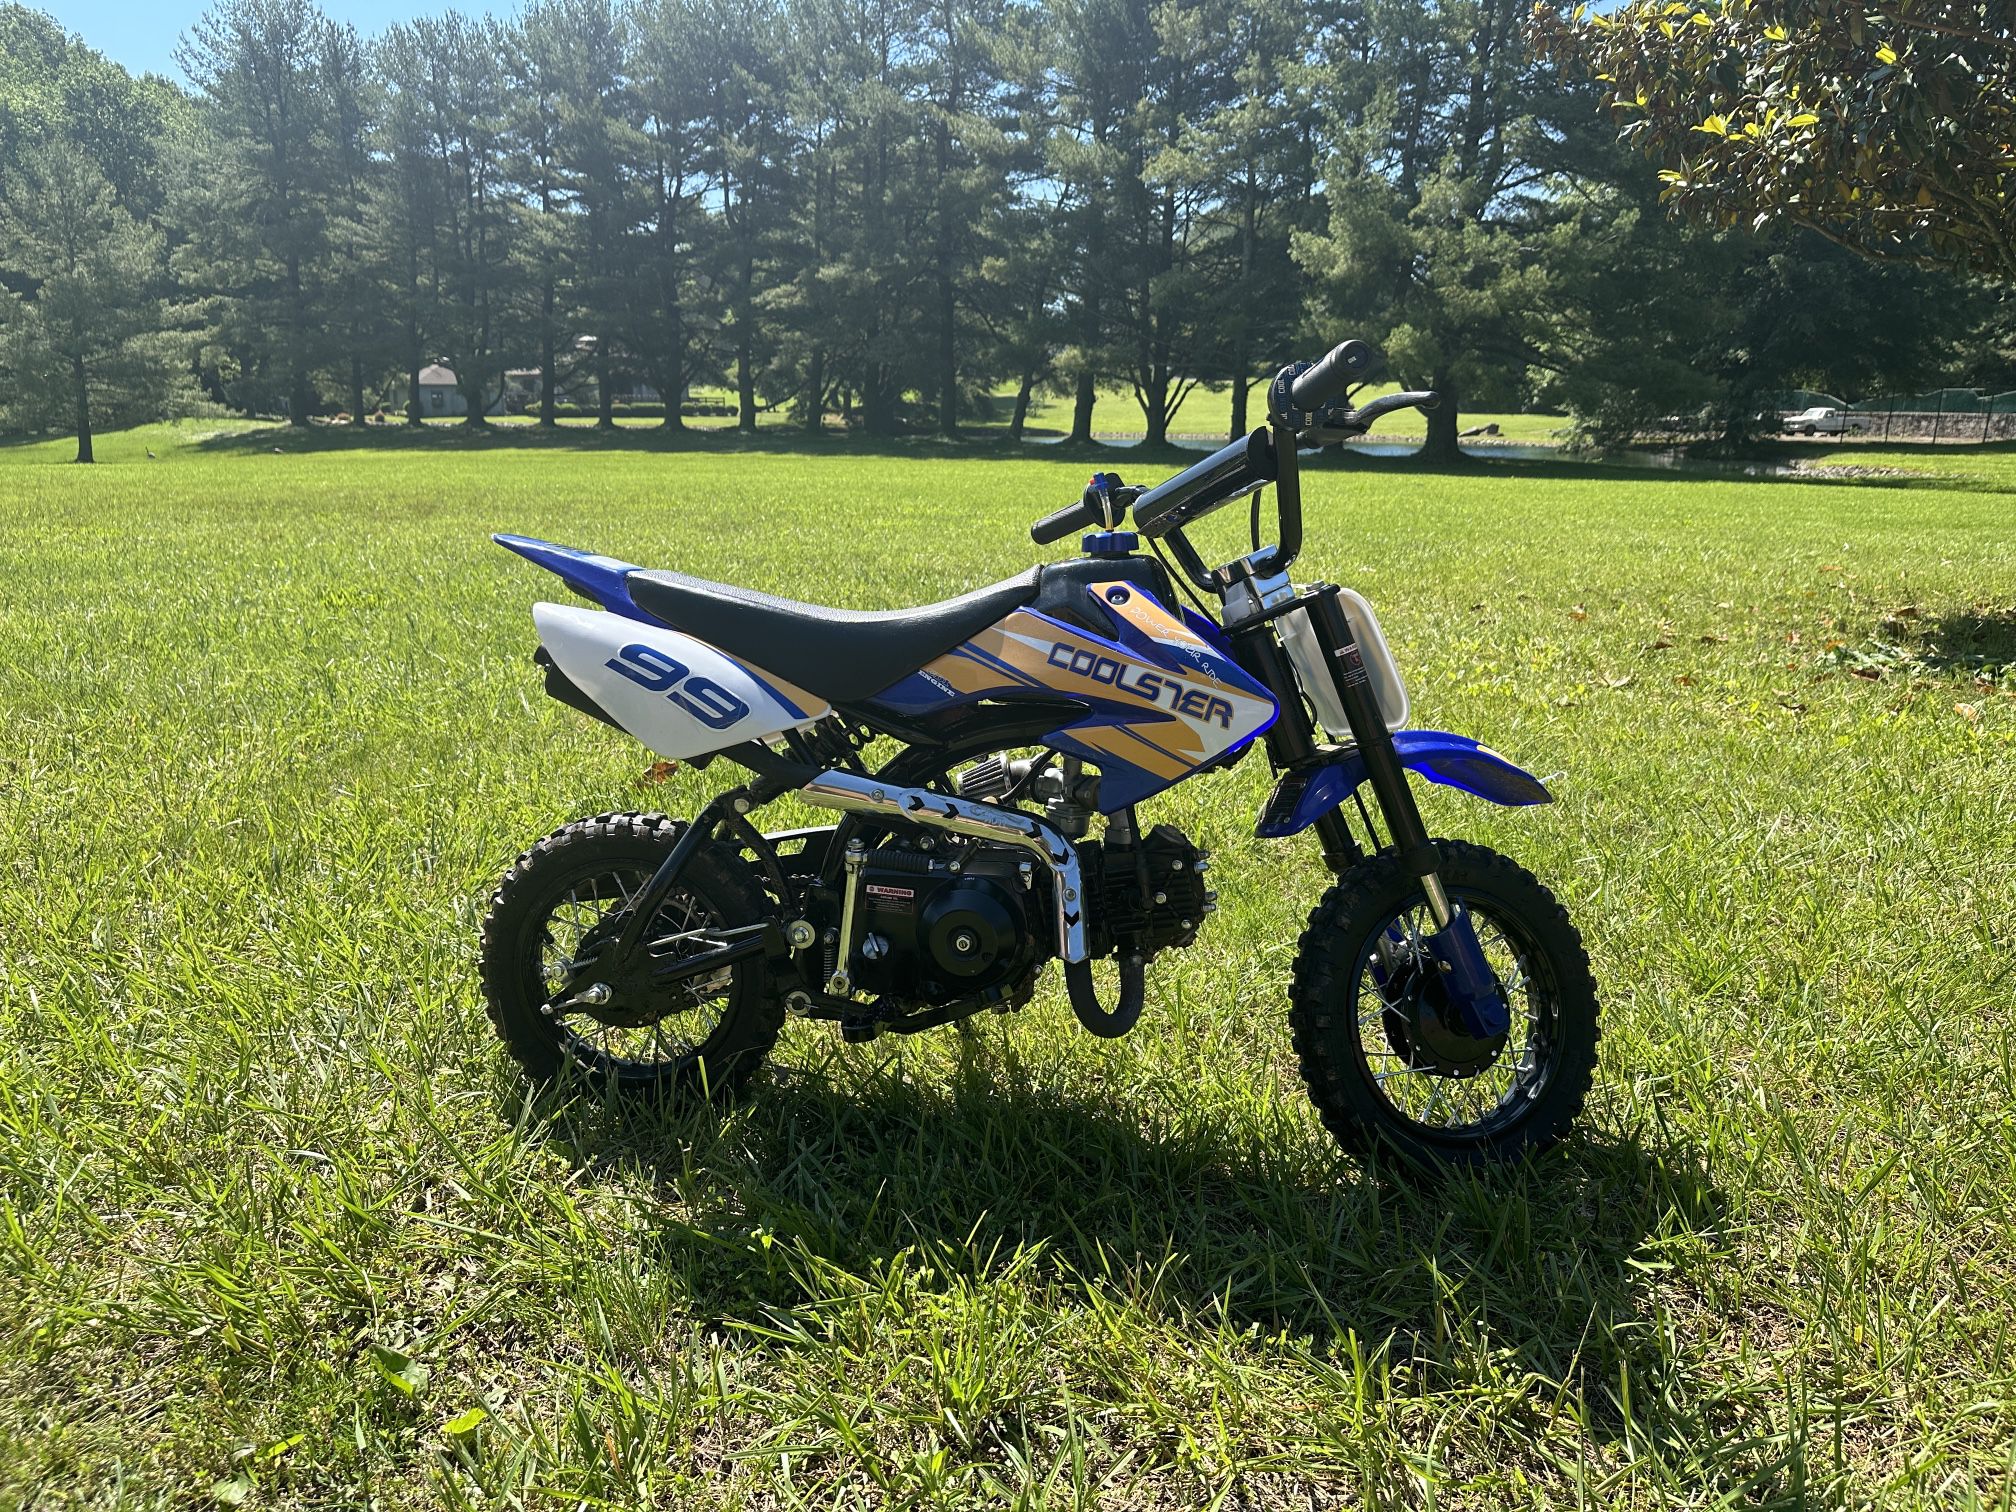 Coolster Dirt Bike 107cc - Youth Size